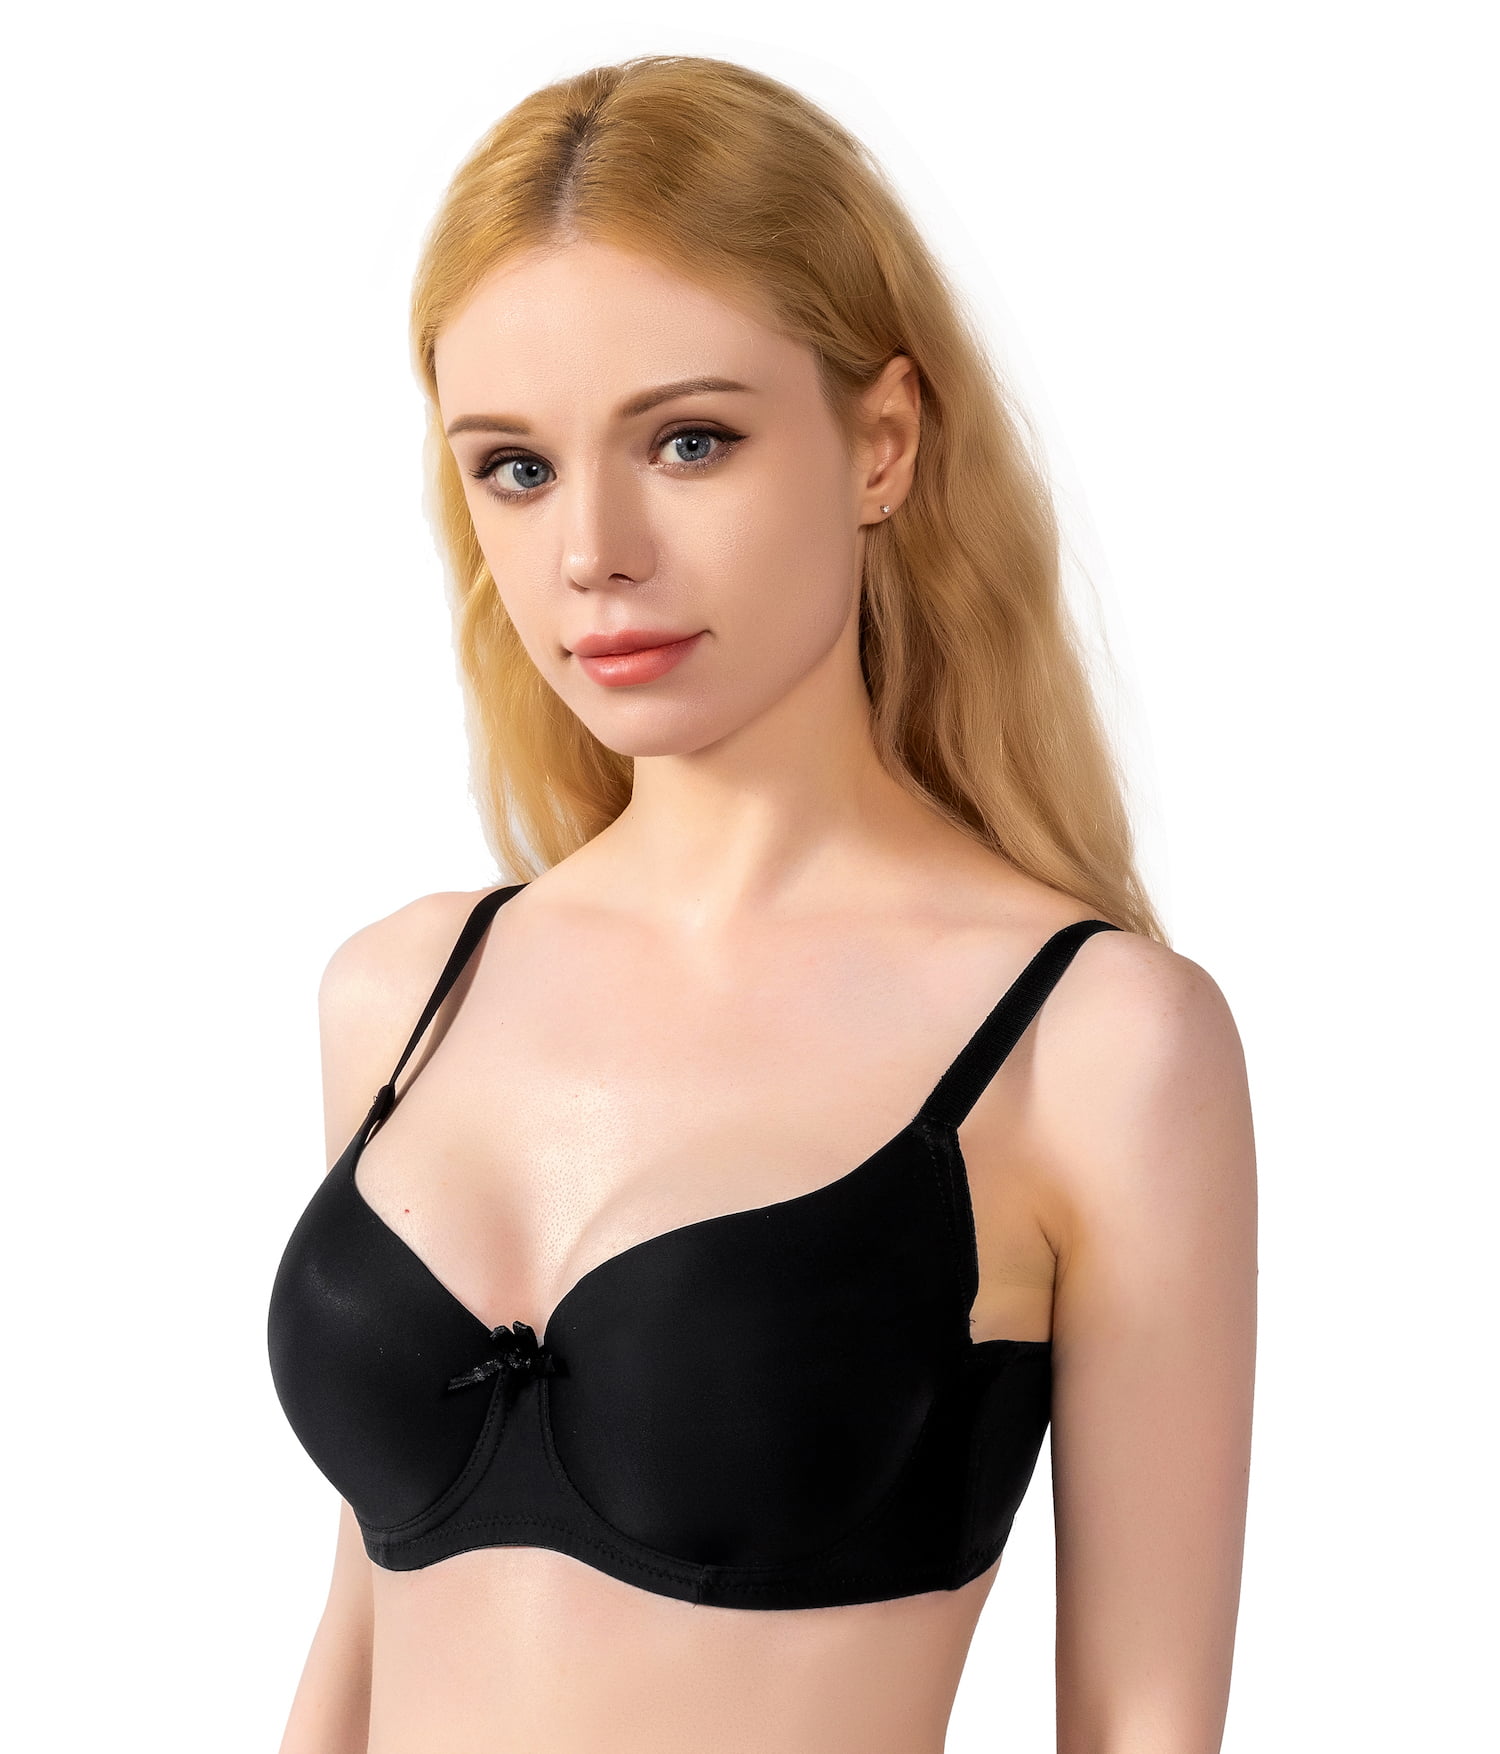 Women Bras 6 Pack of Bra D cup DD cup DDD cup Size 42D (F8203) 